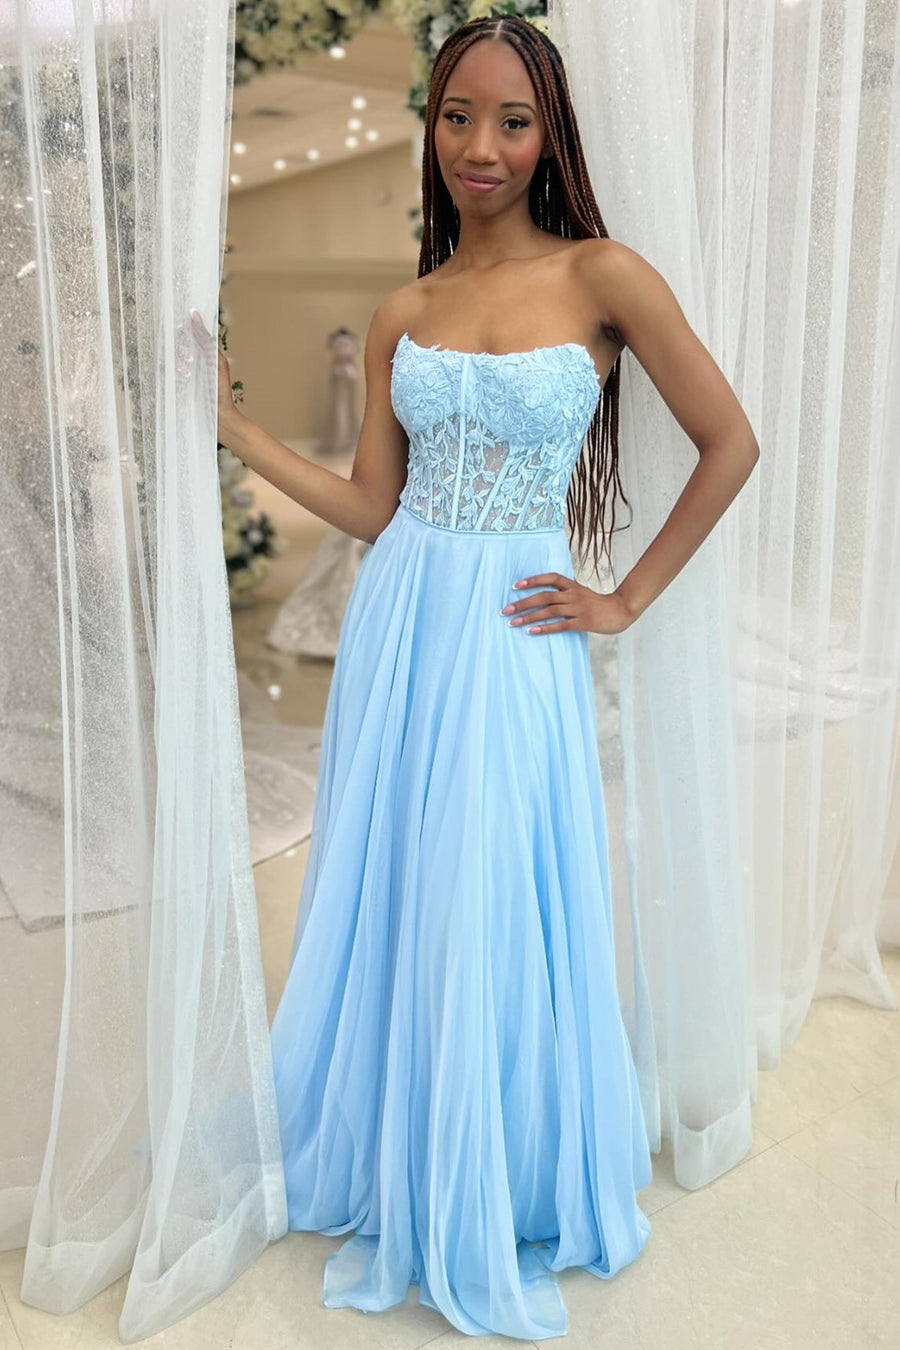 Chiffon Appliques Strapless A-Line Long Prom Dress in light blue